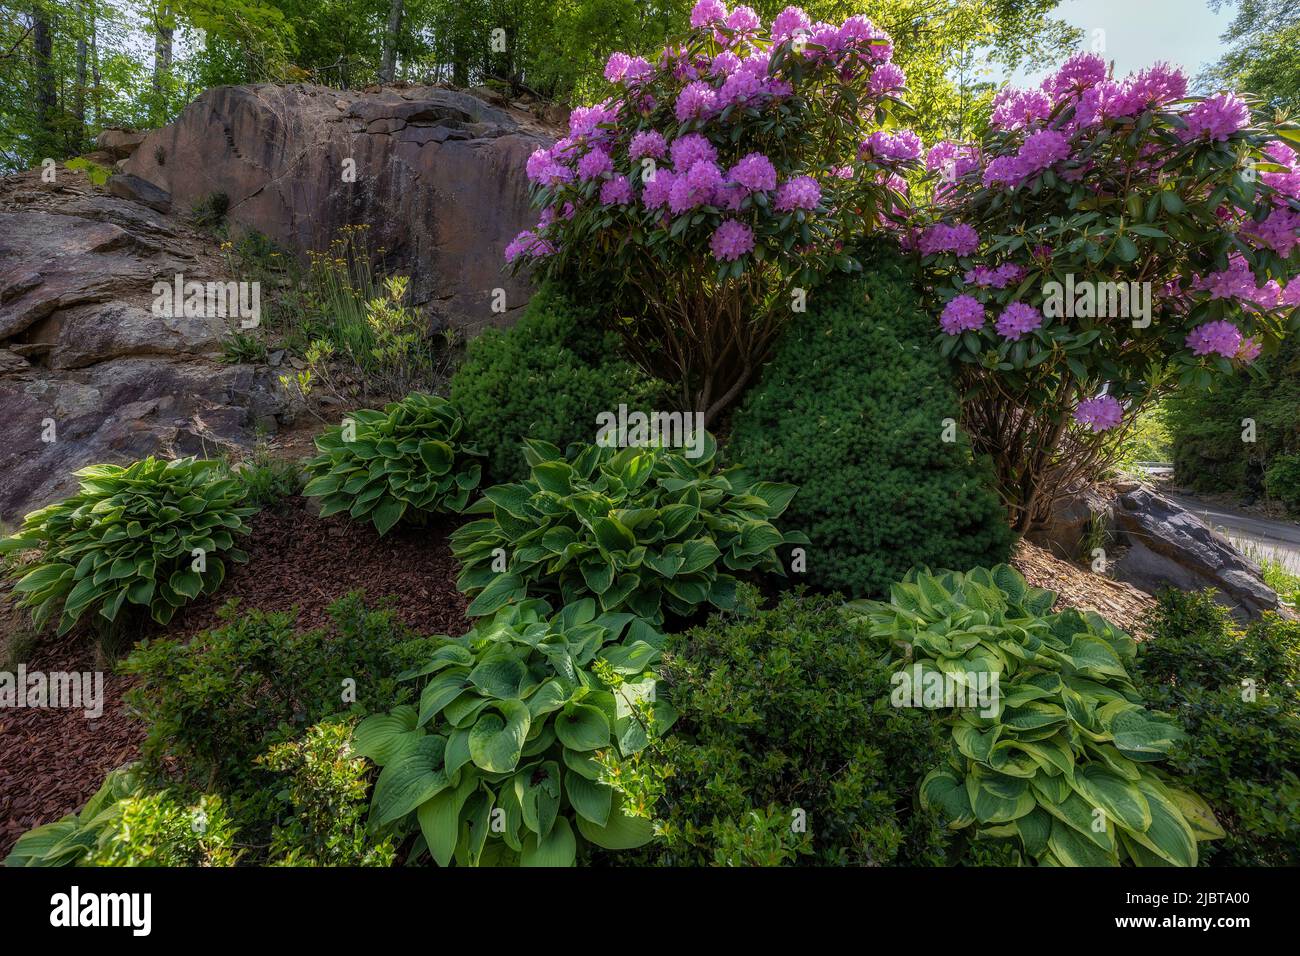 Rhododendron blooming in a shade garden with lush green foloiage plants. Stock Photo